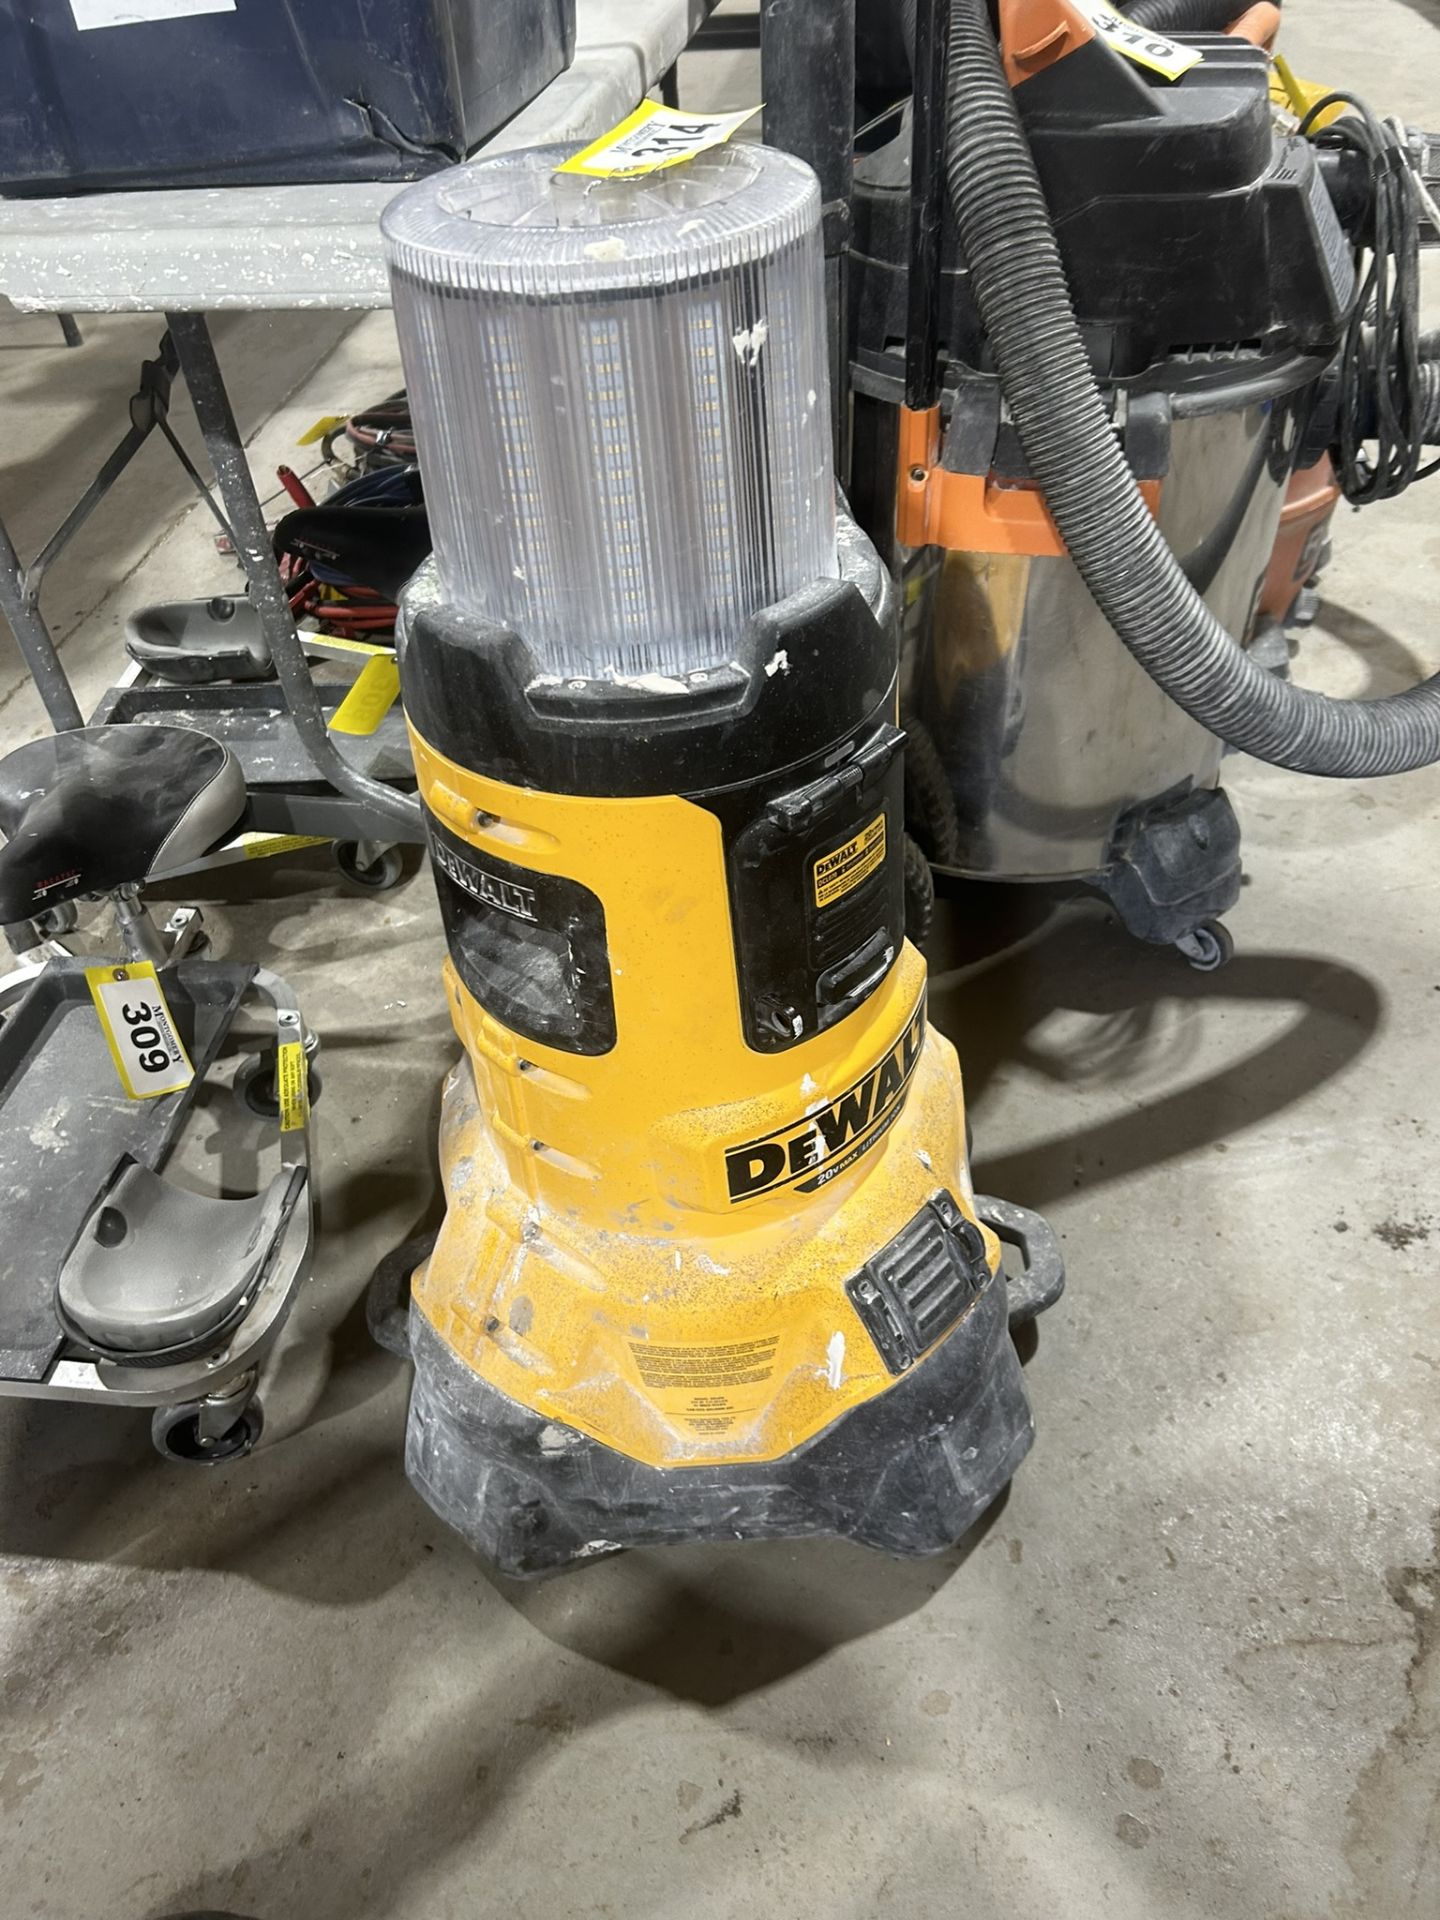 DEWALT DCL070 ELEC./CORDLESS BLUETOOTH LARGE AREA LED LIGHT W/ BUILT IN BATTERY CHARGER - Image 3 of 8